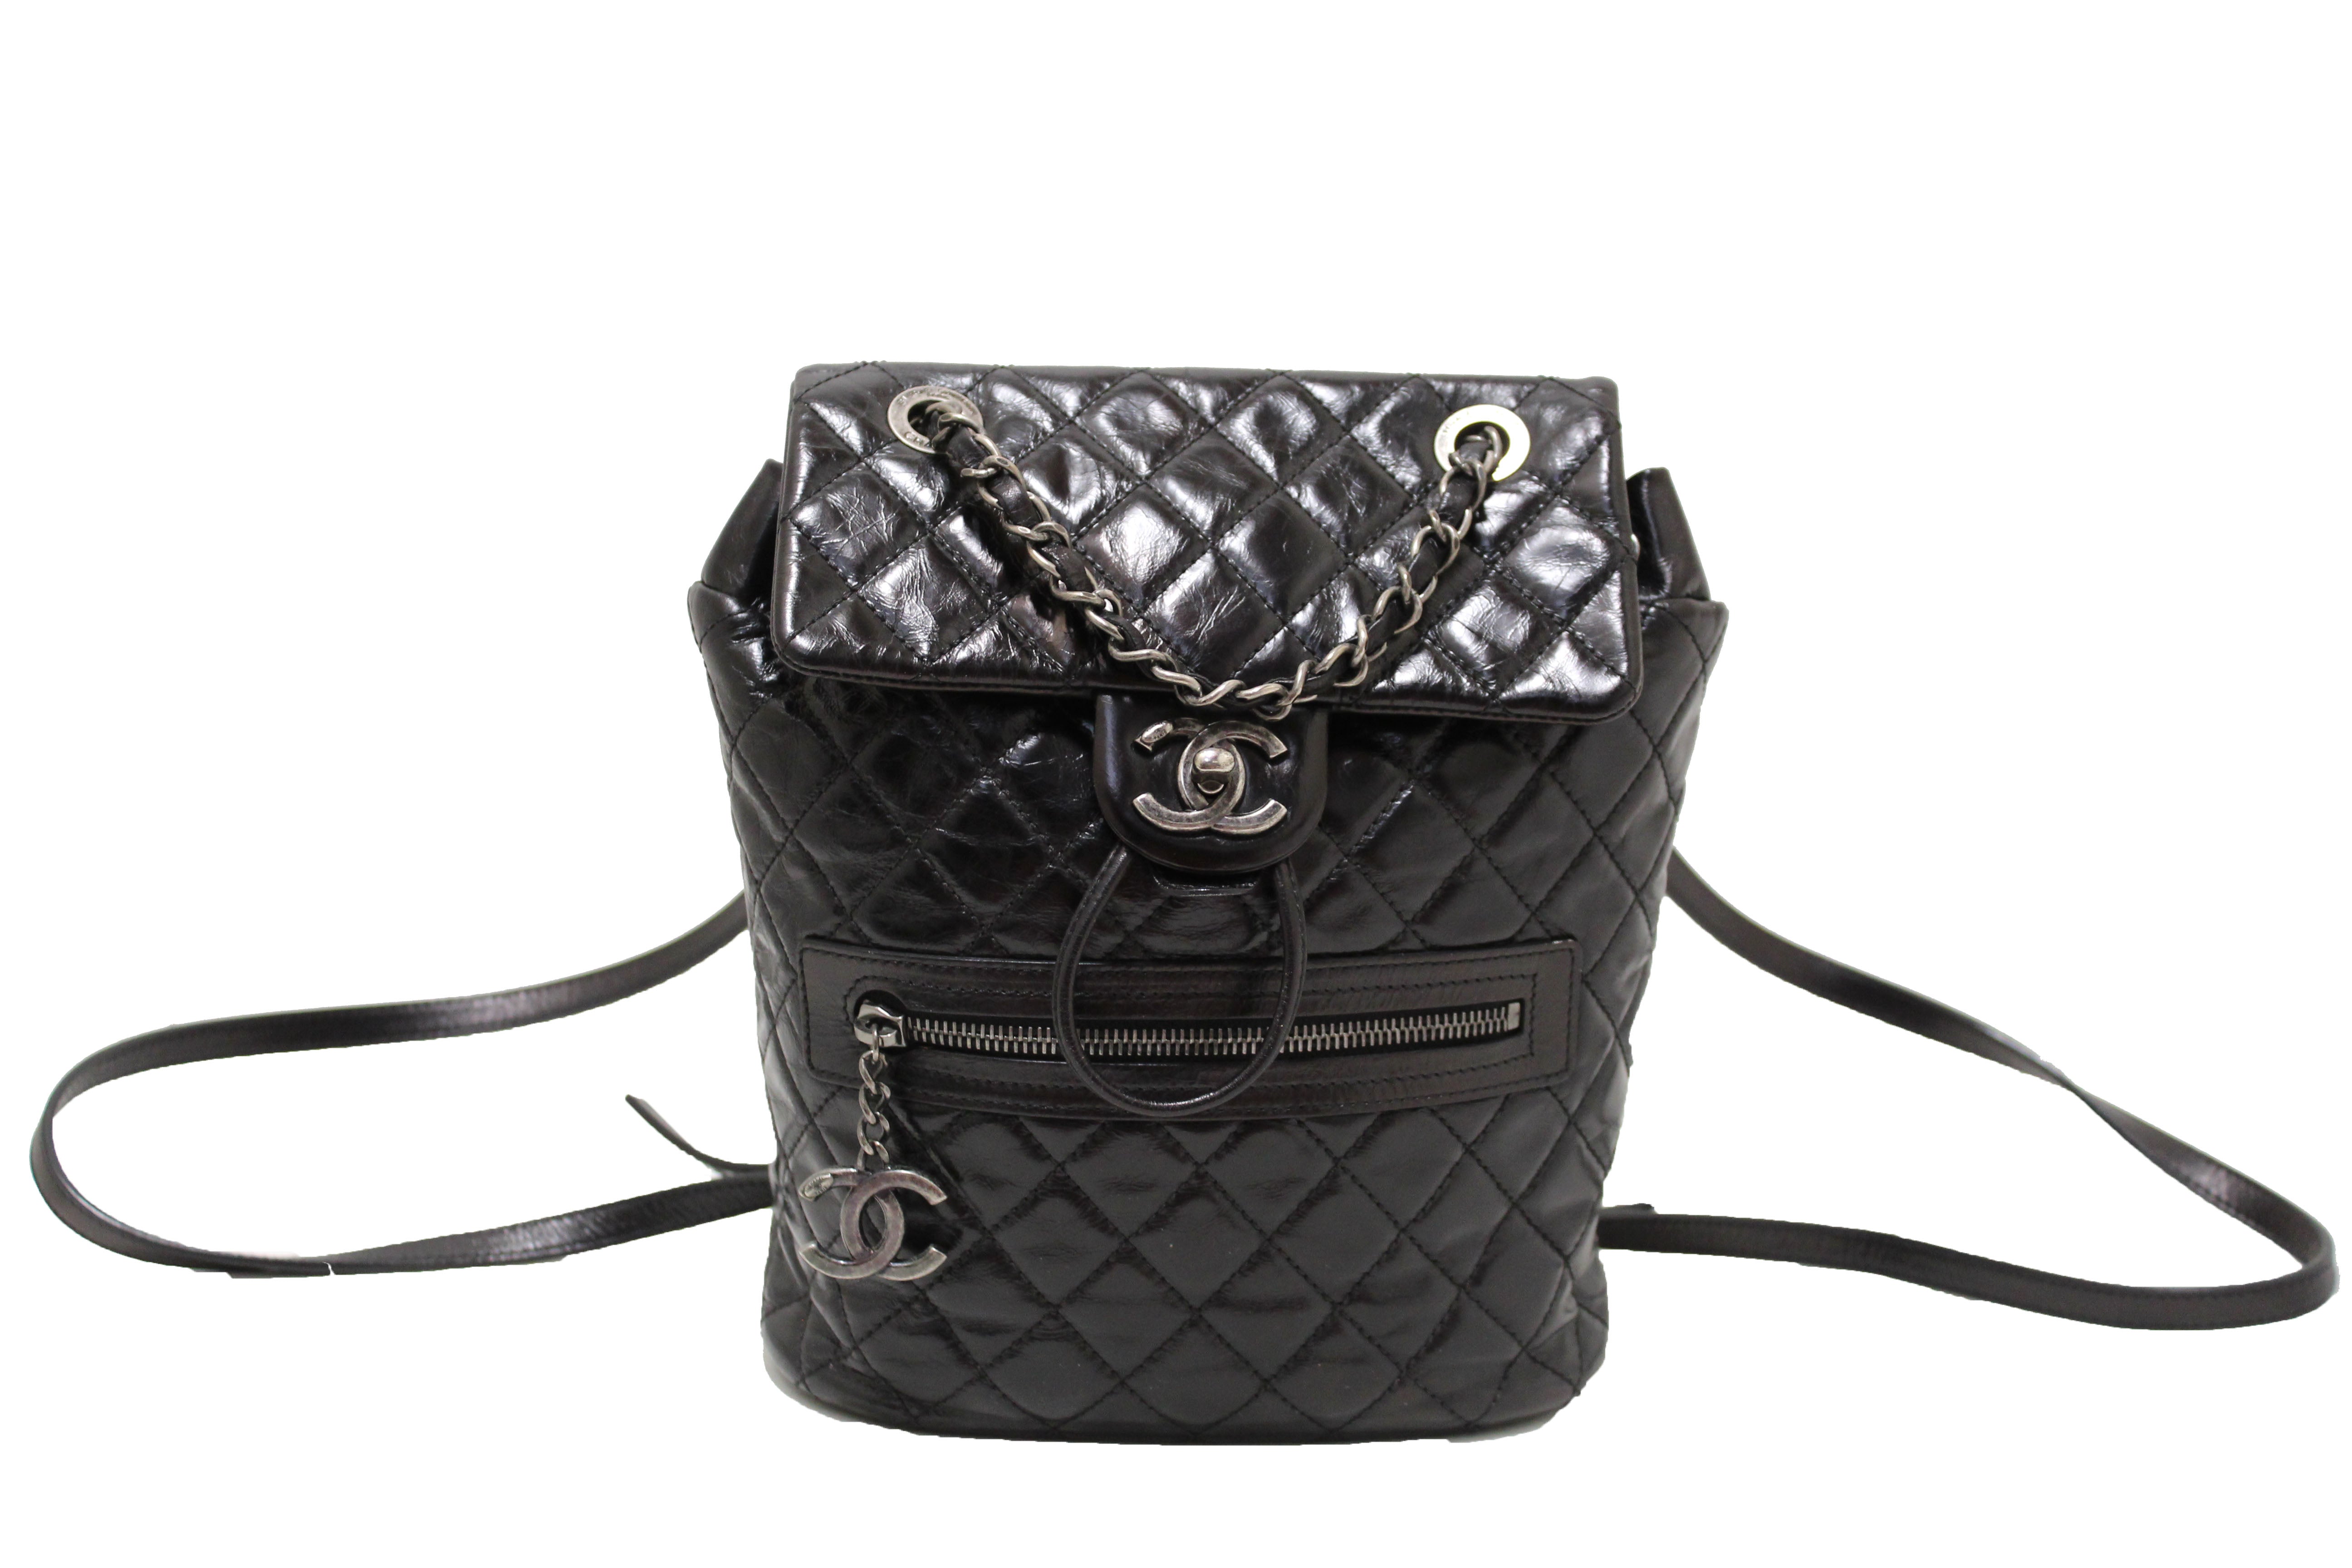 Chanel Black Quilted Glazed Calfskin Mountain Backpack